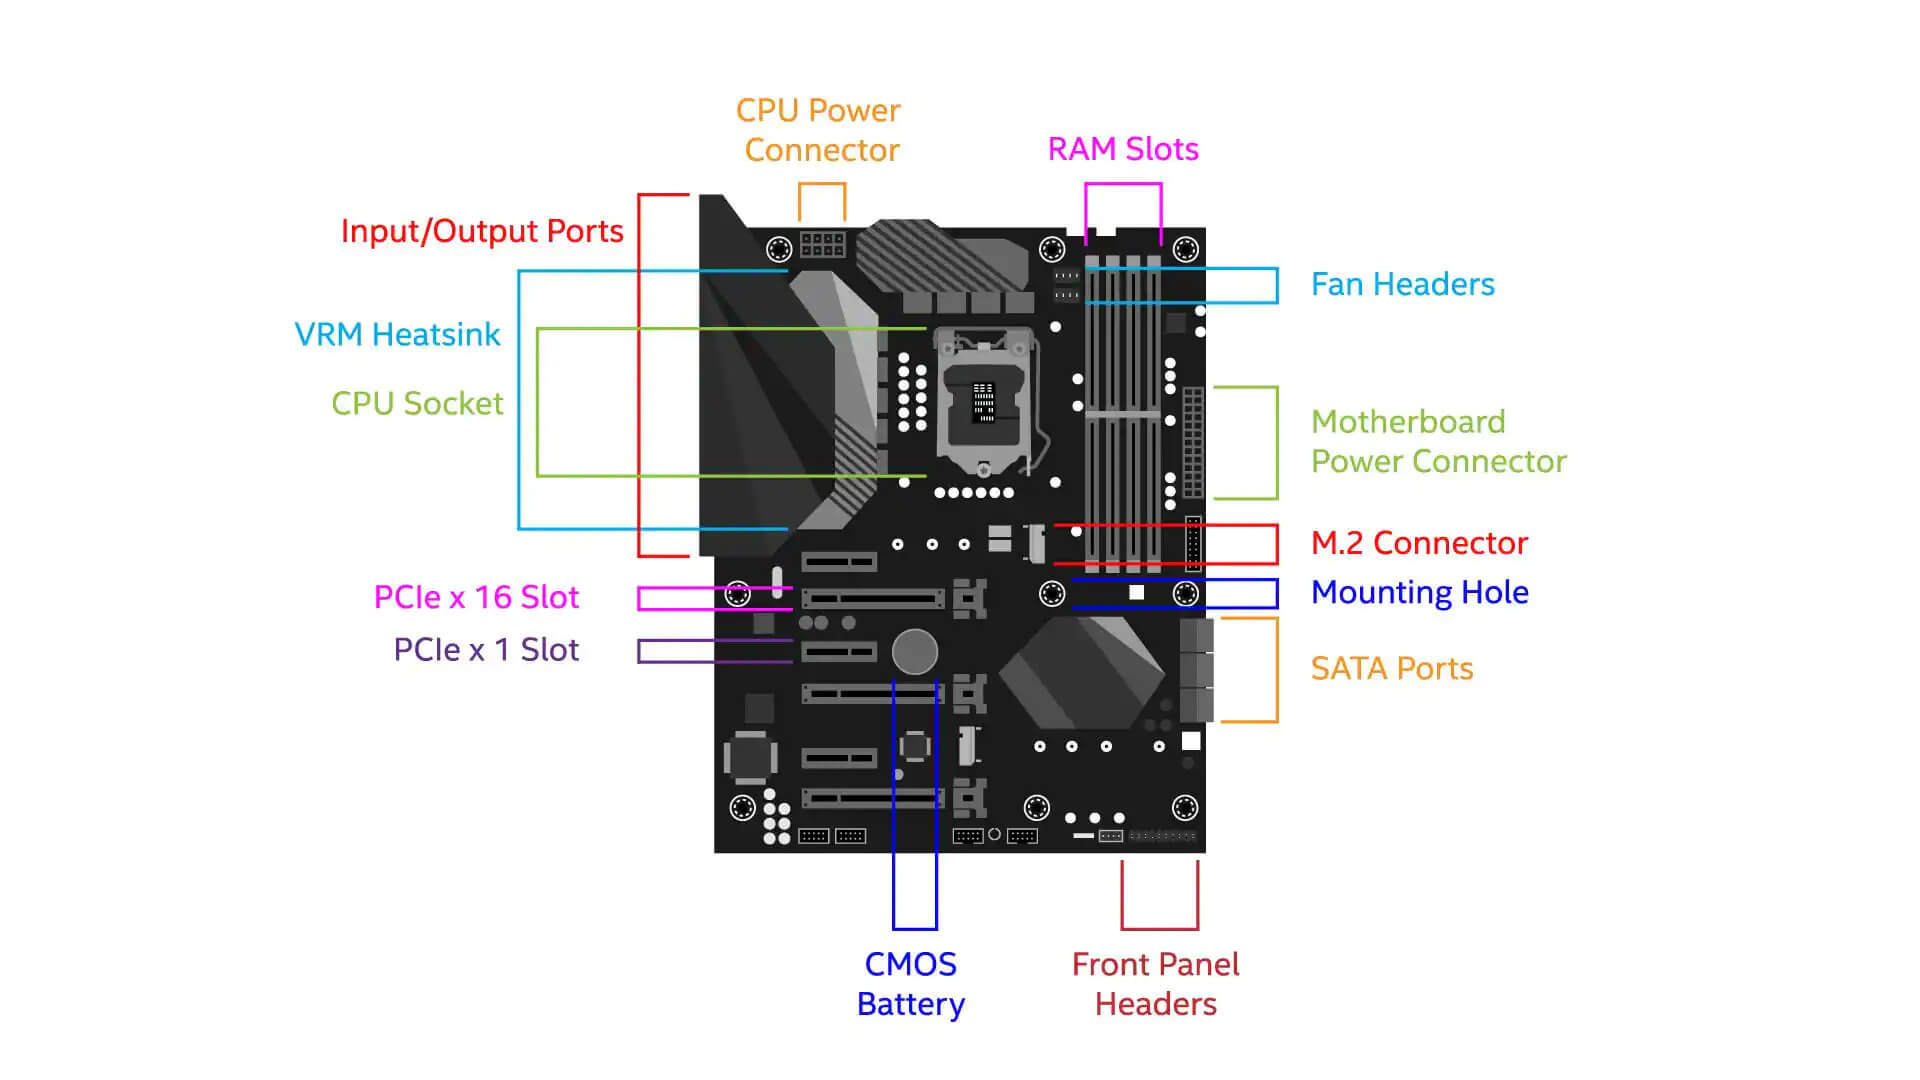 Anatomy of Motherboard